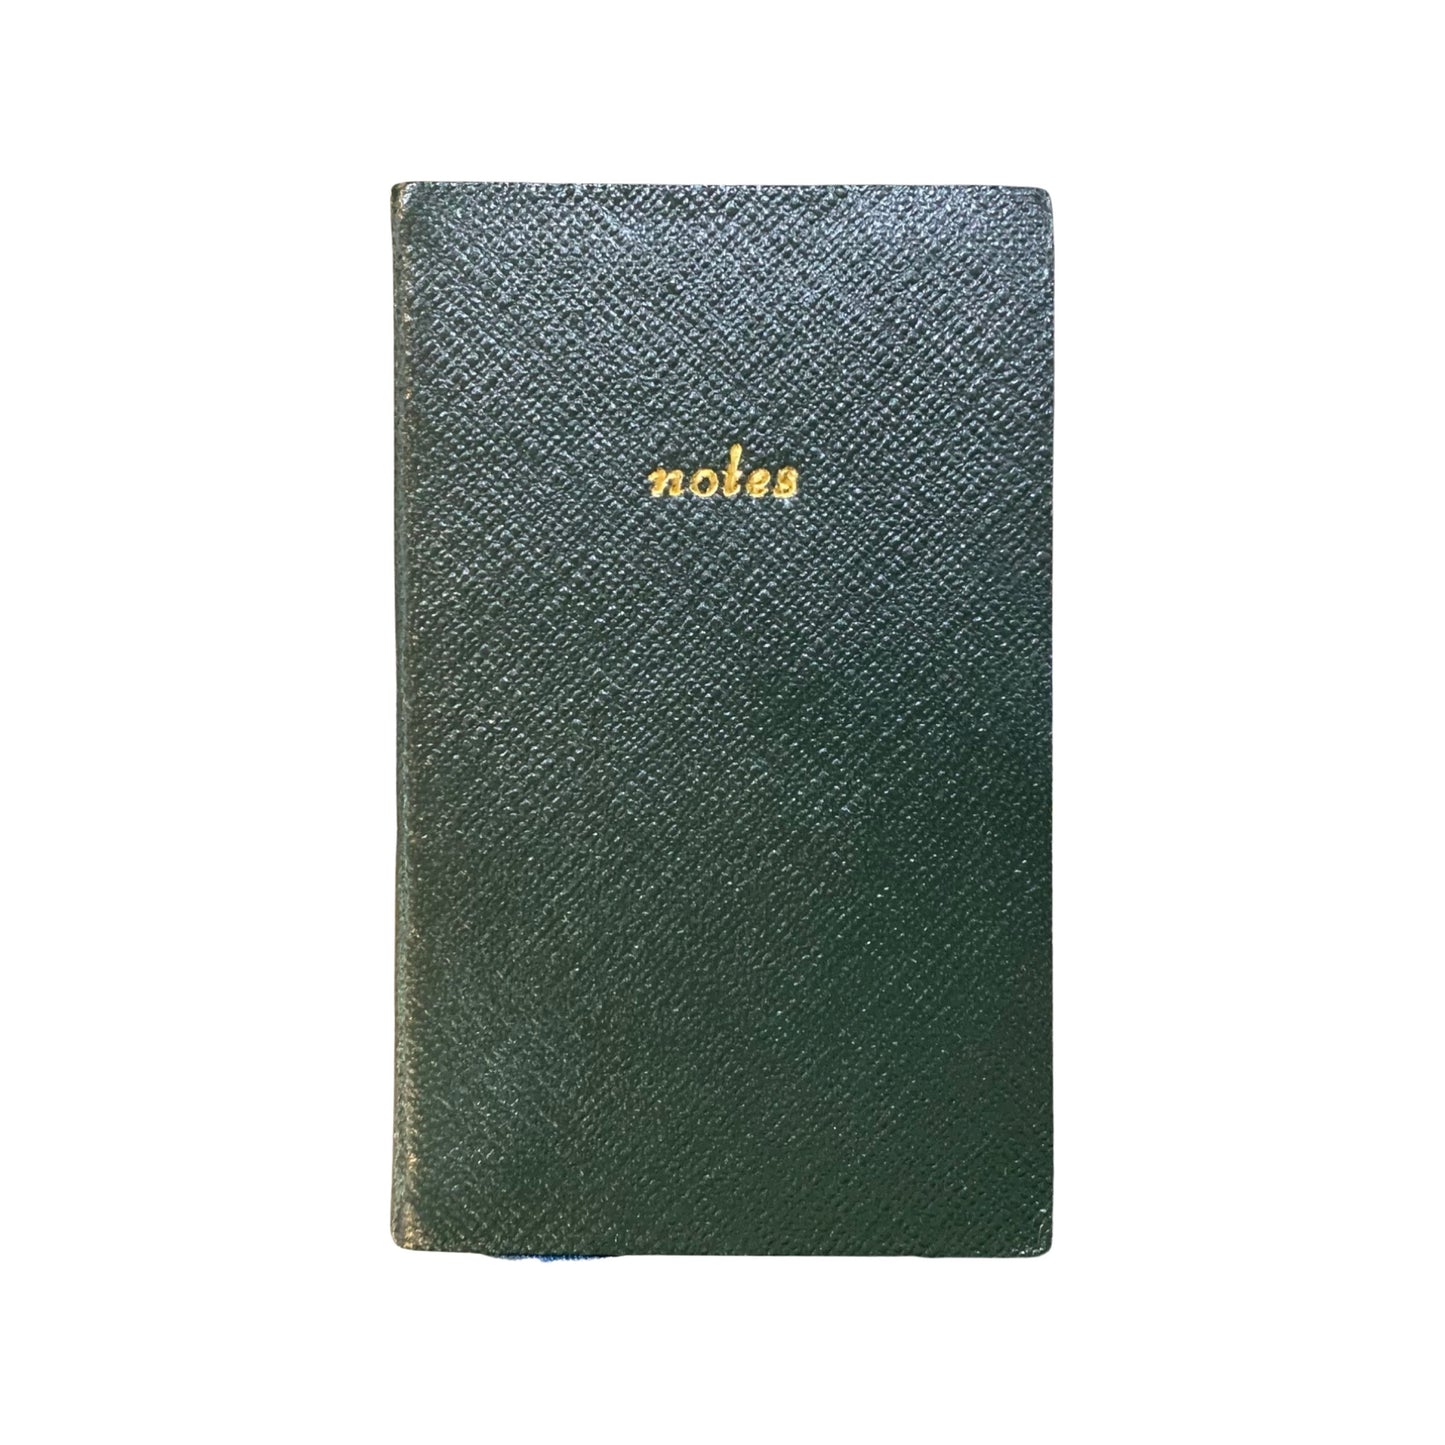 Leather Notebook | 5x3" | Crossgrain Leather | Titled: Notes | N53L